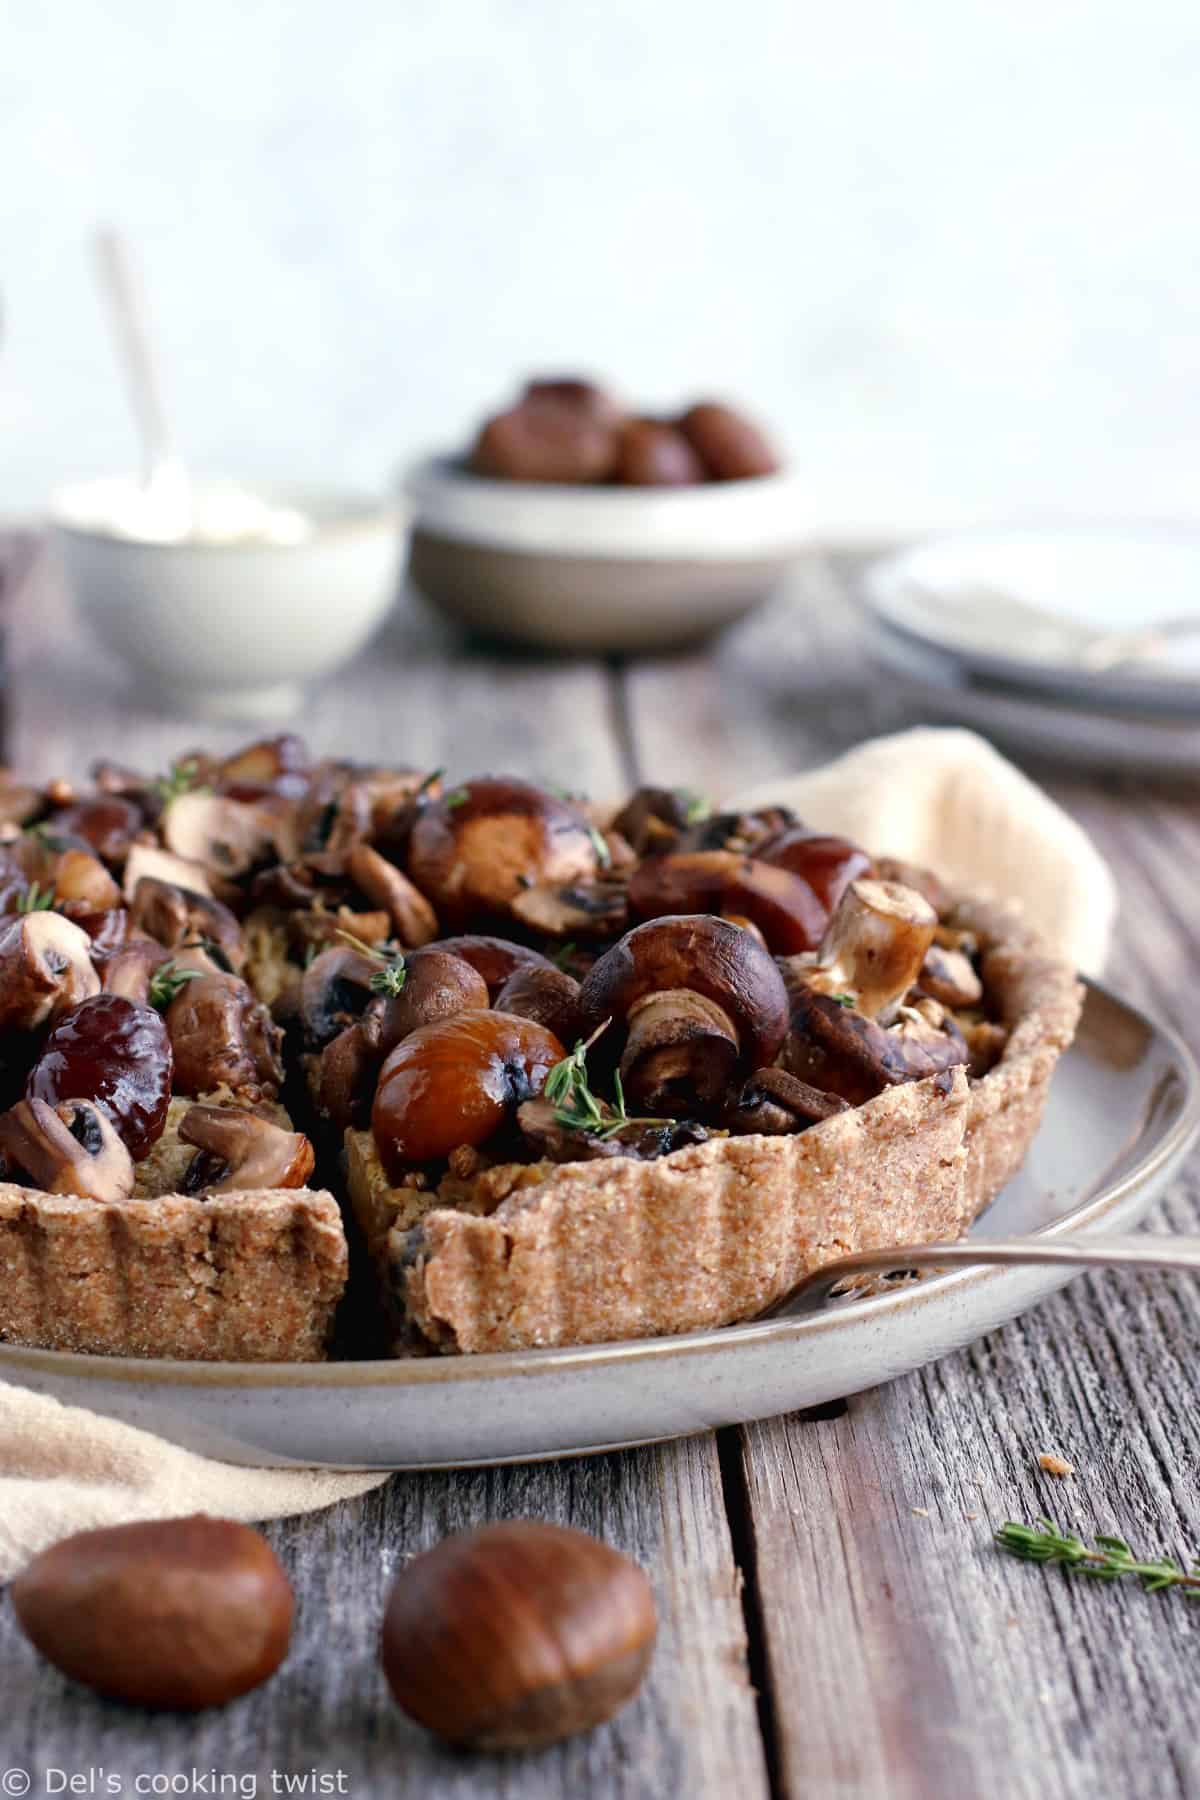 Chestnut, leek and mushroom tart with coriander seeds is prepared with my favorite whole wheat pie crust.